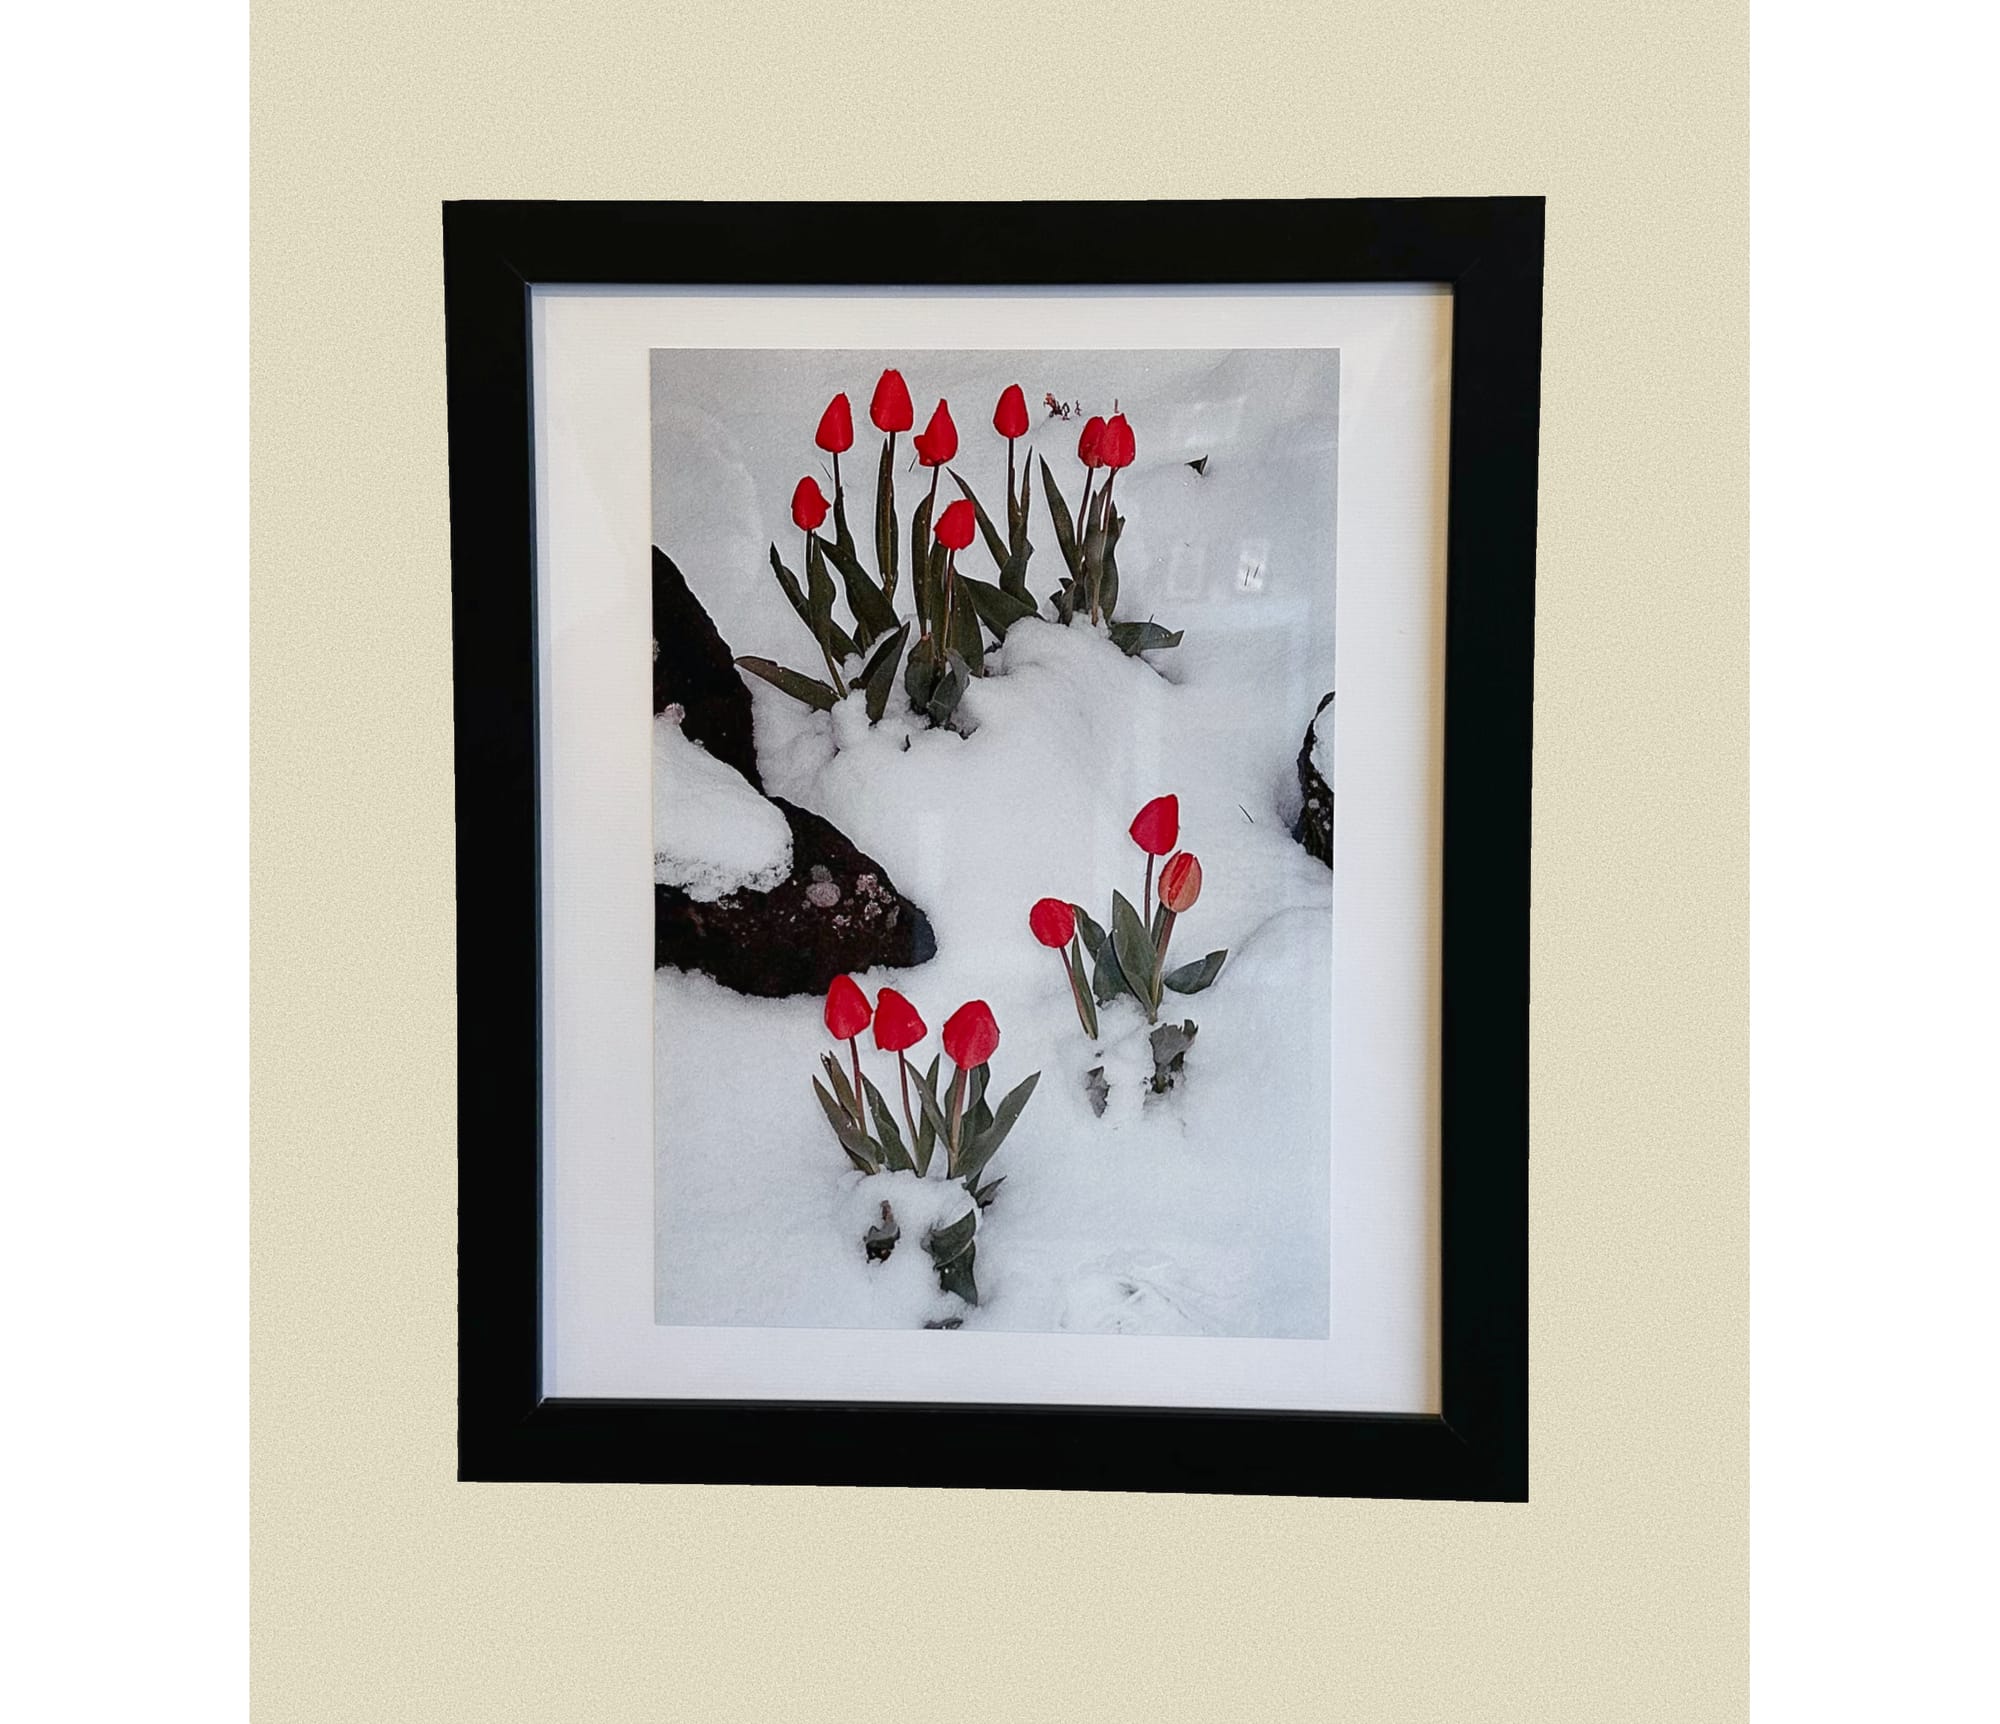 A photo of red tulips in the snow